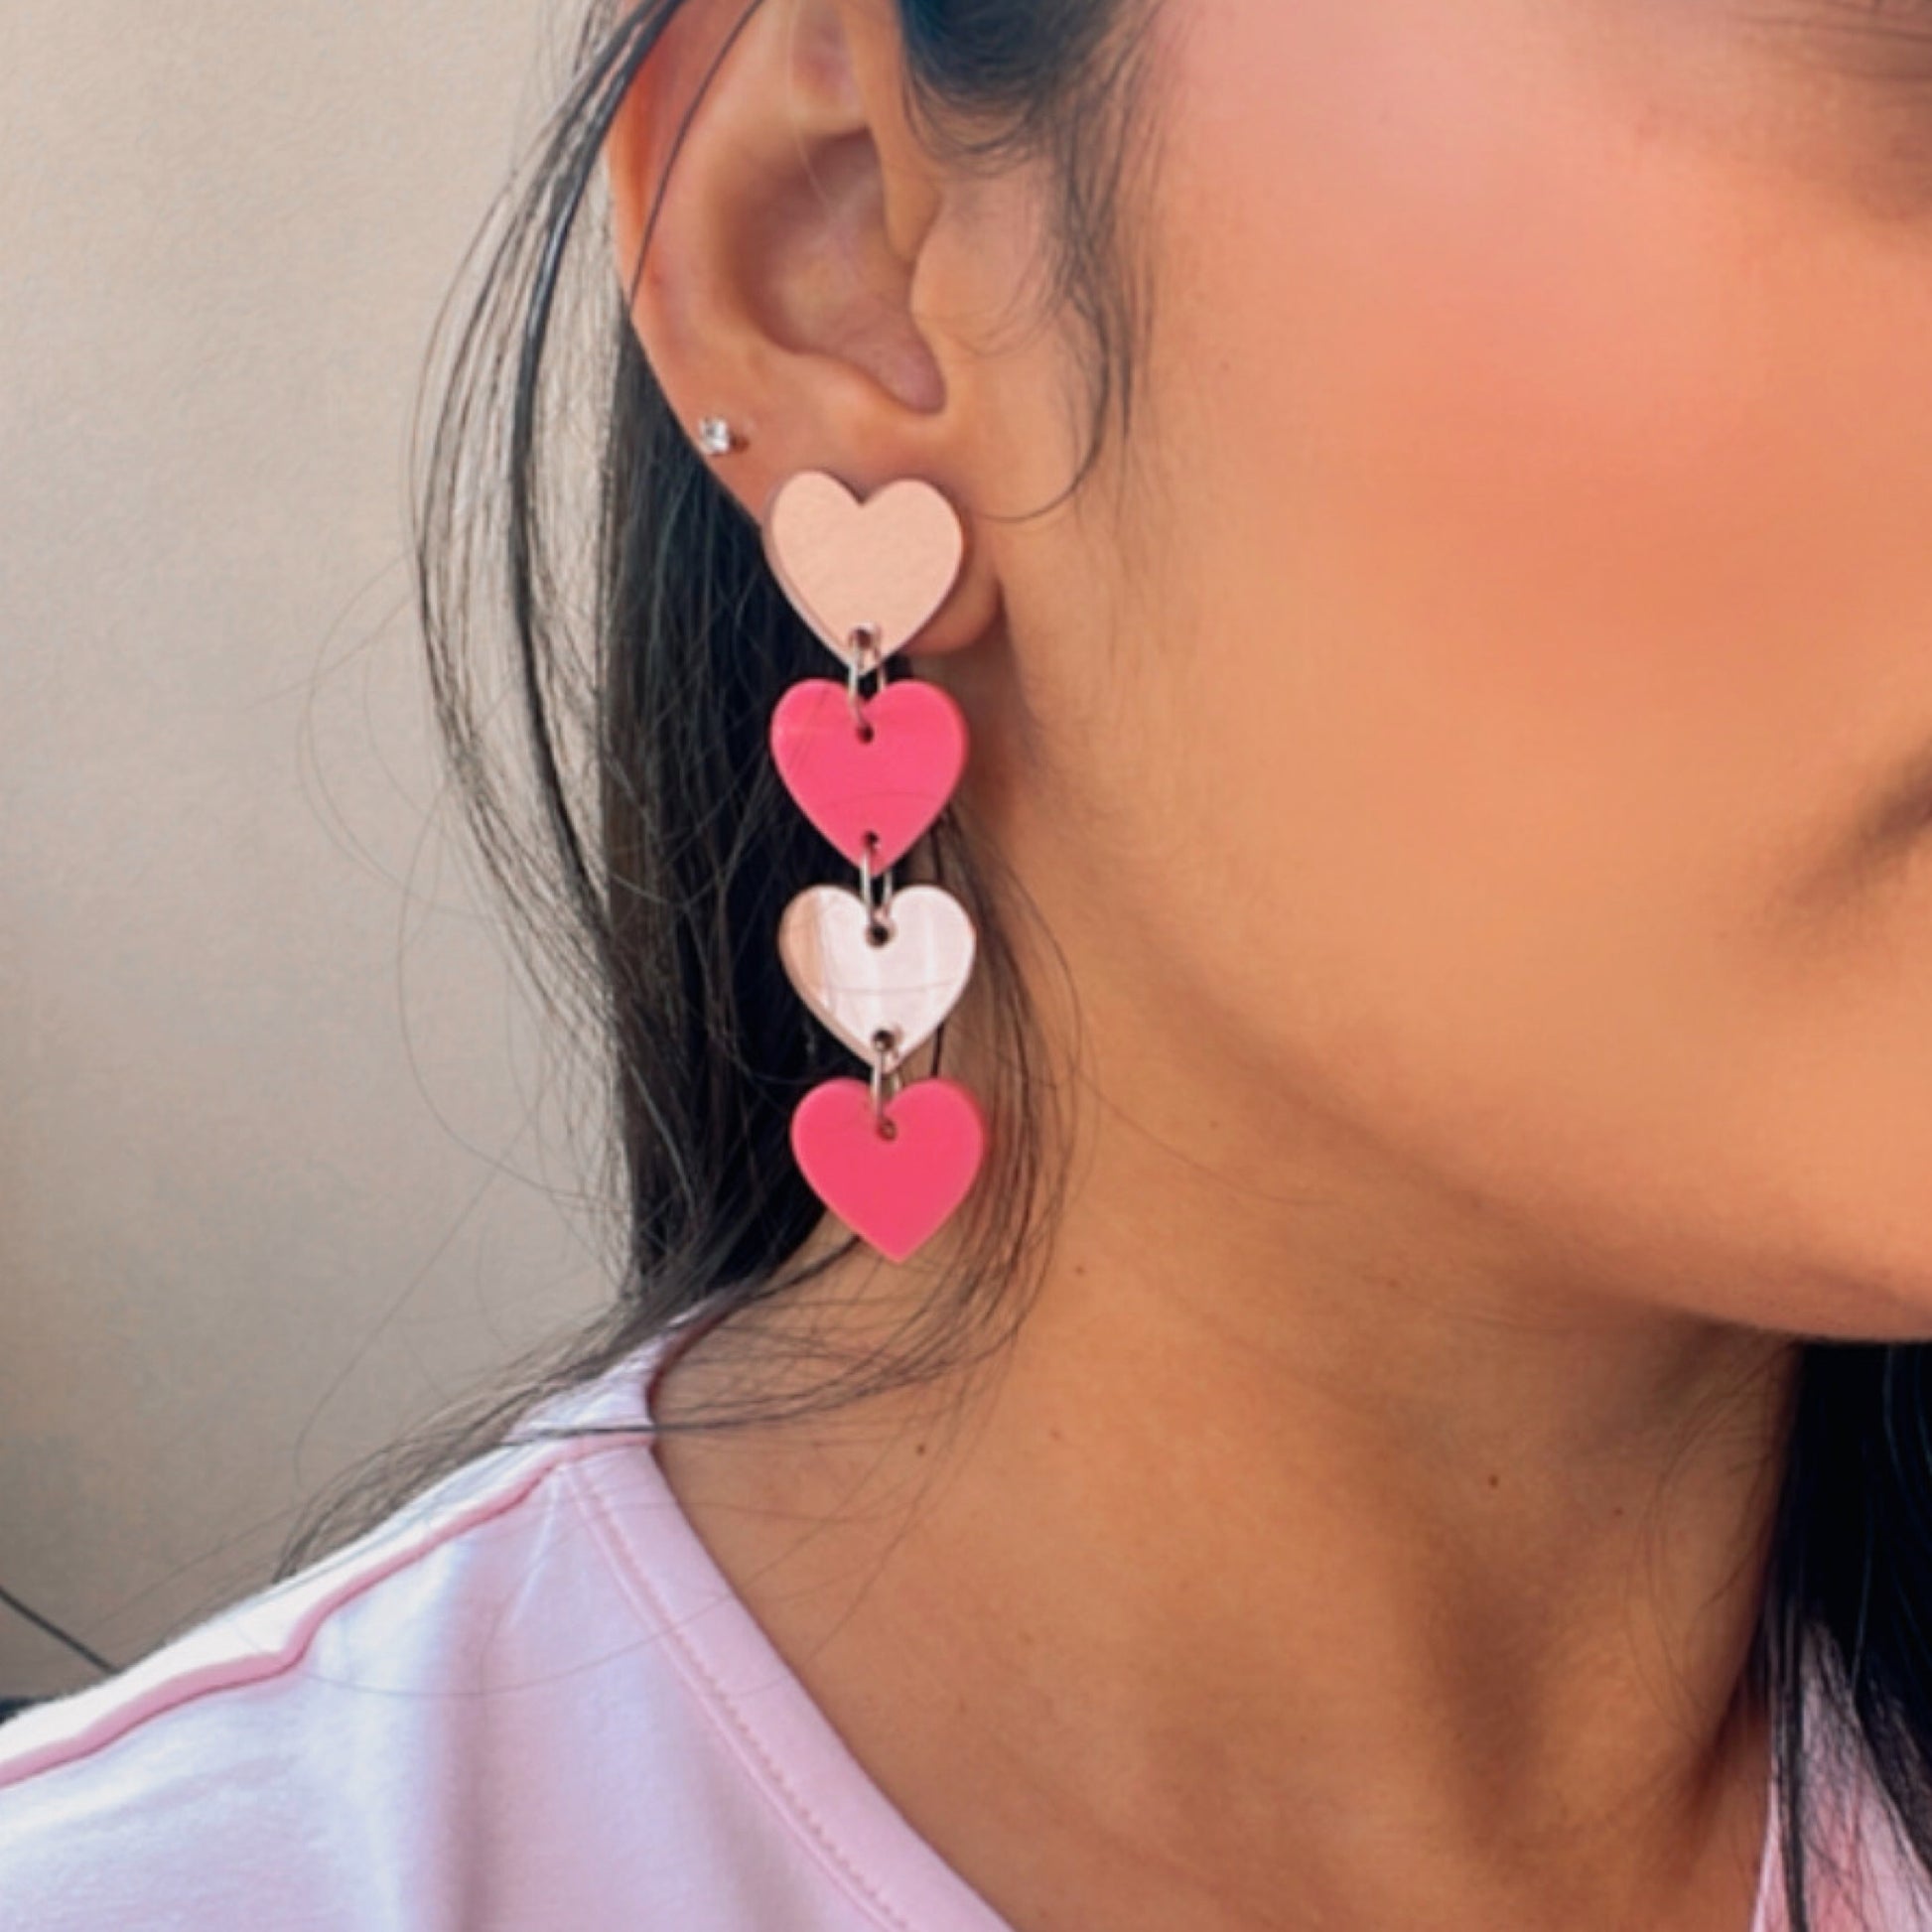 Little Heart Danglers - Pink and Rosegold - Nian by Nian - worn by a woman